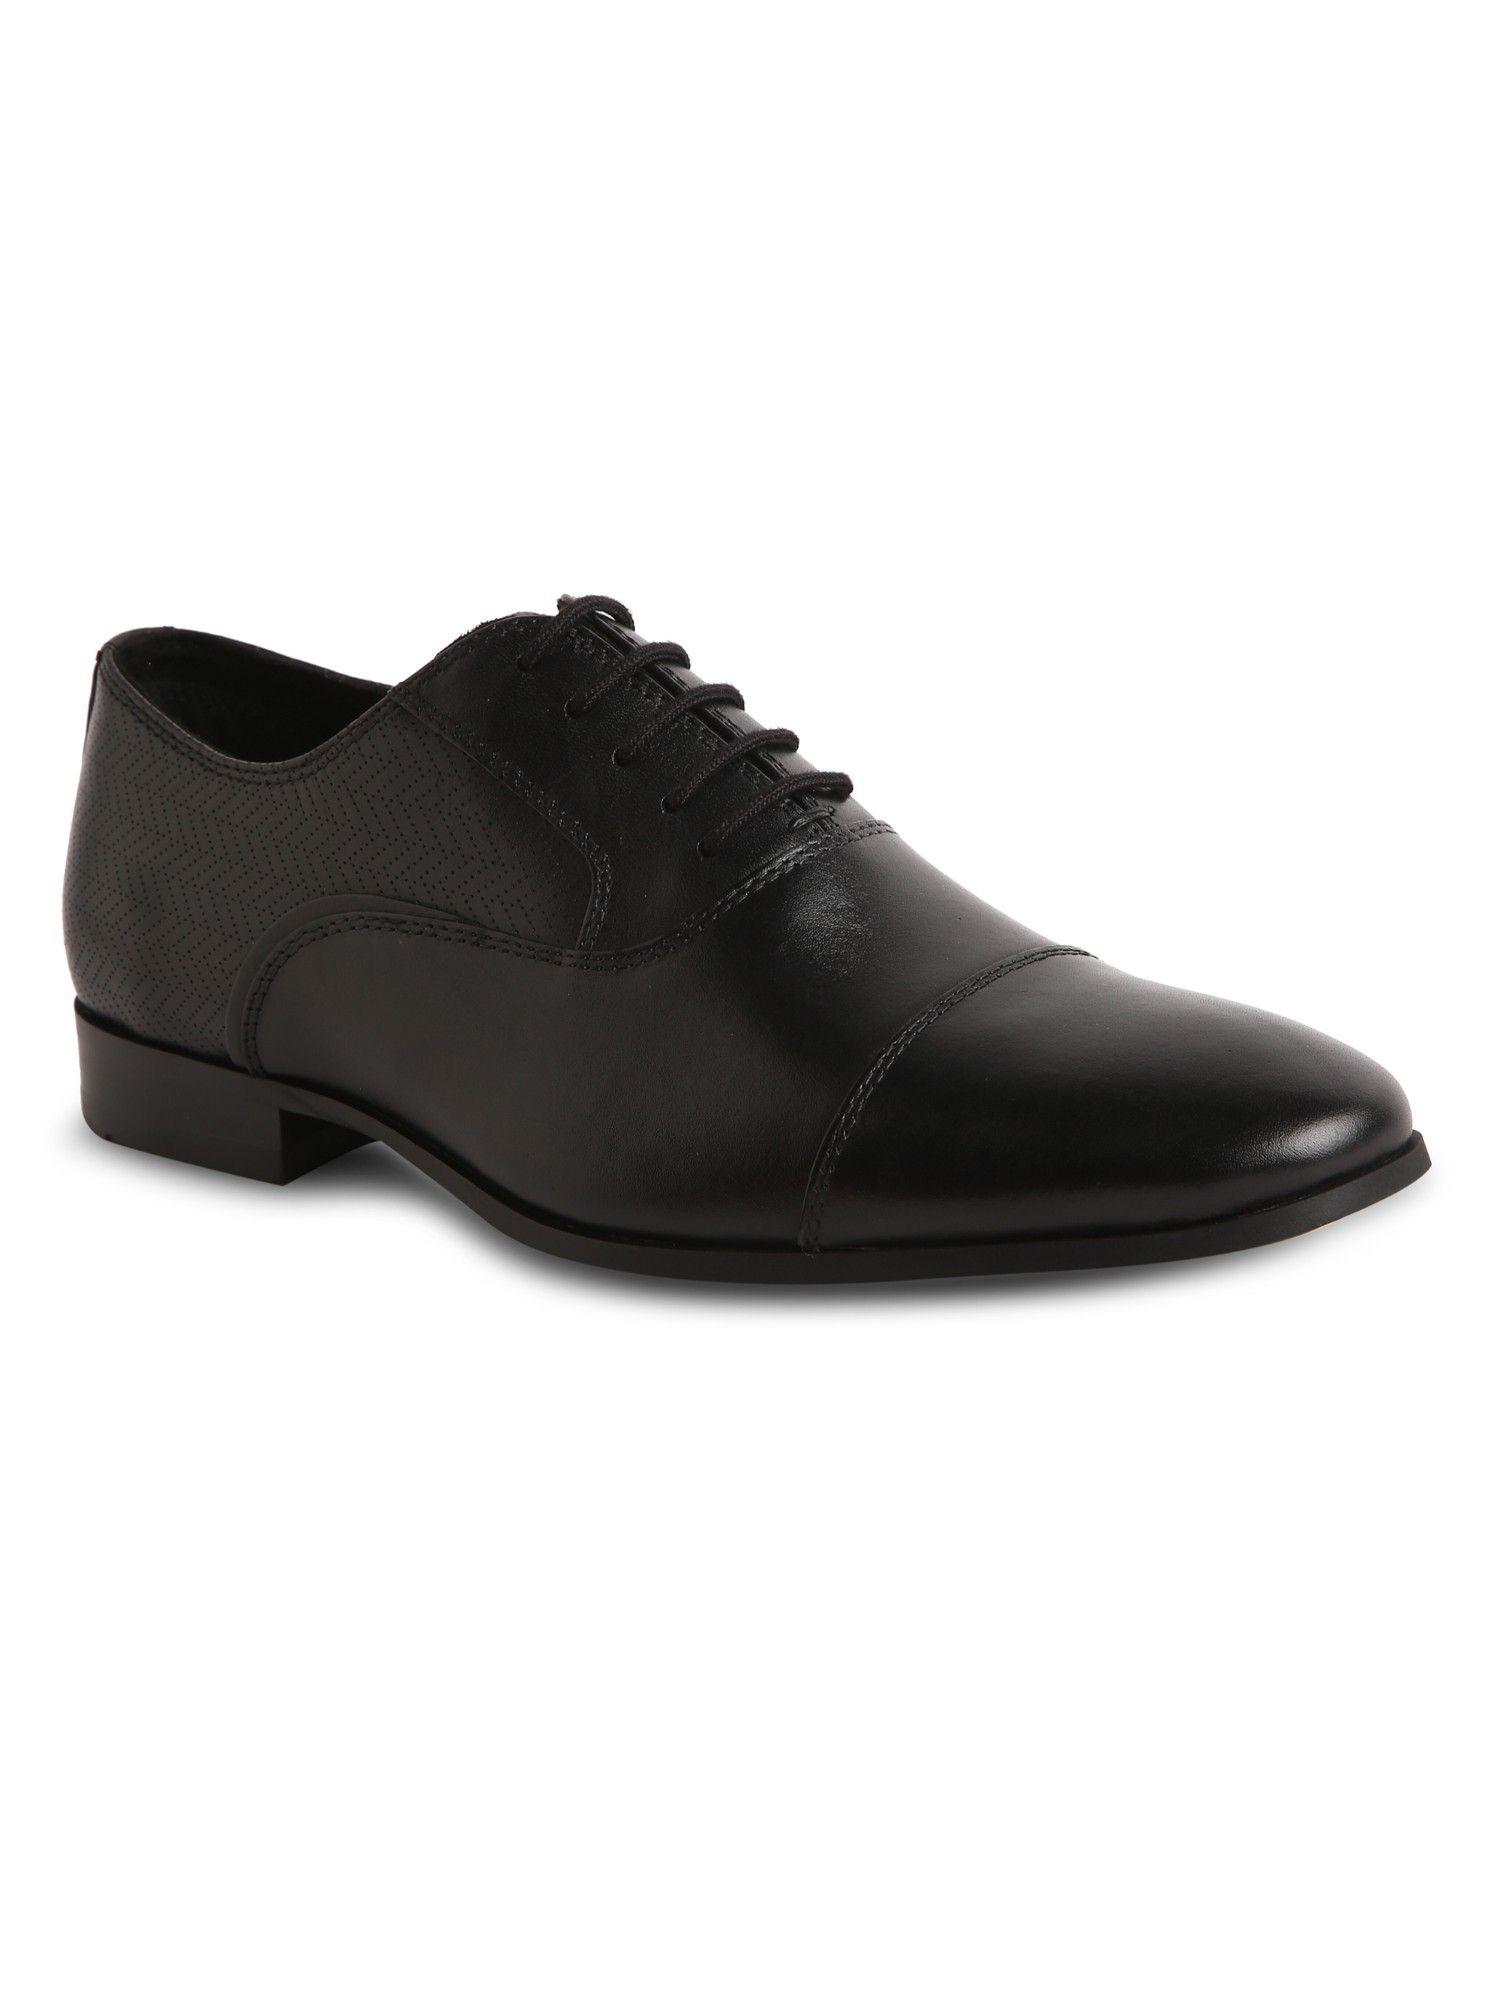 albeck leather black solid formal shoes